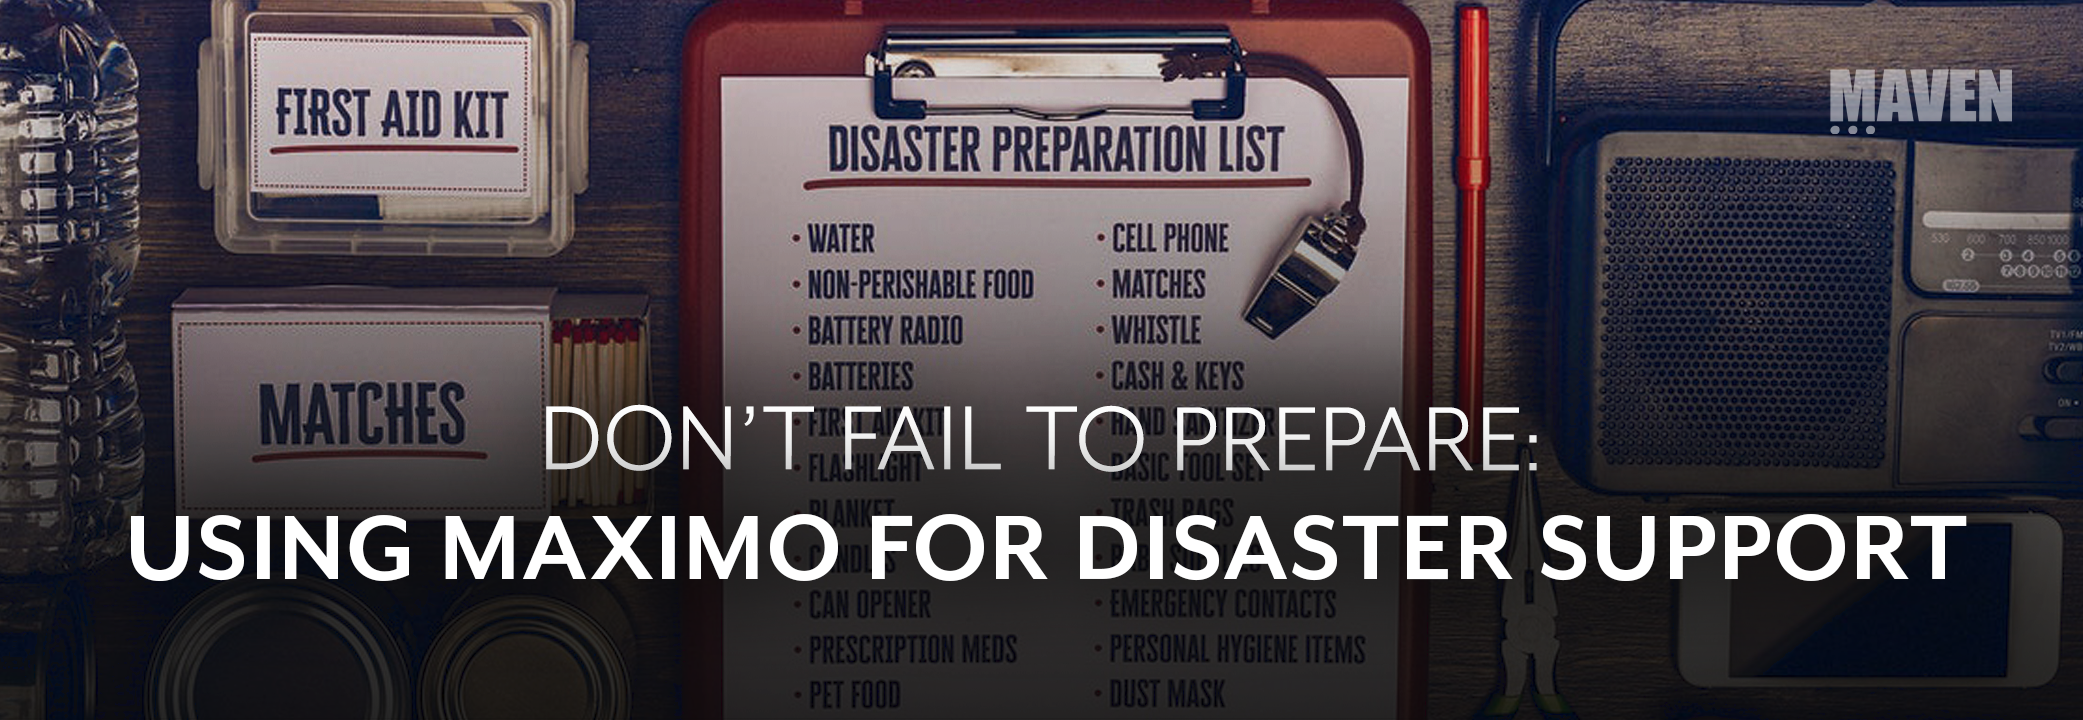 Don’t Fail to Prepare: Using Maximo for Disaster Support